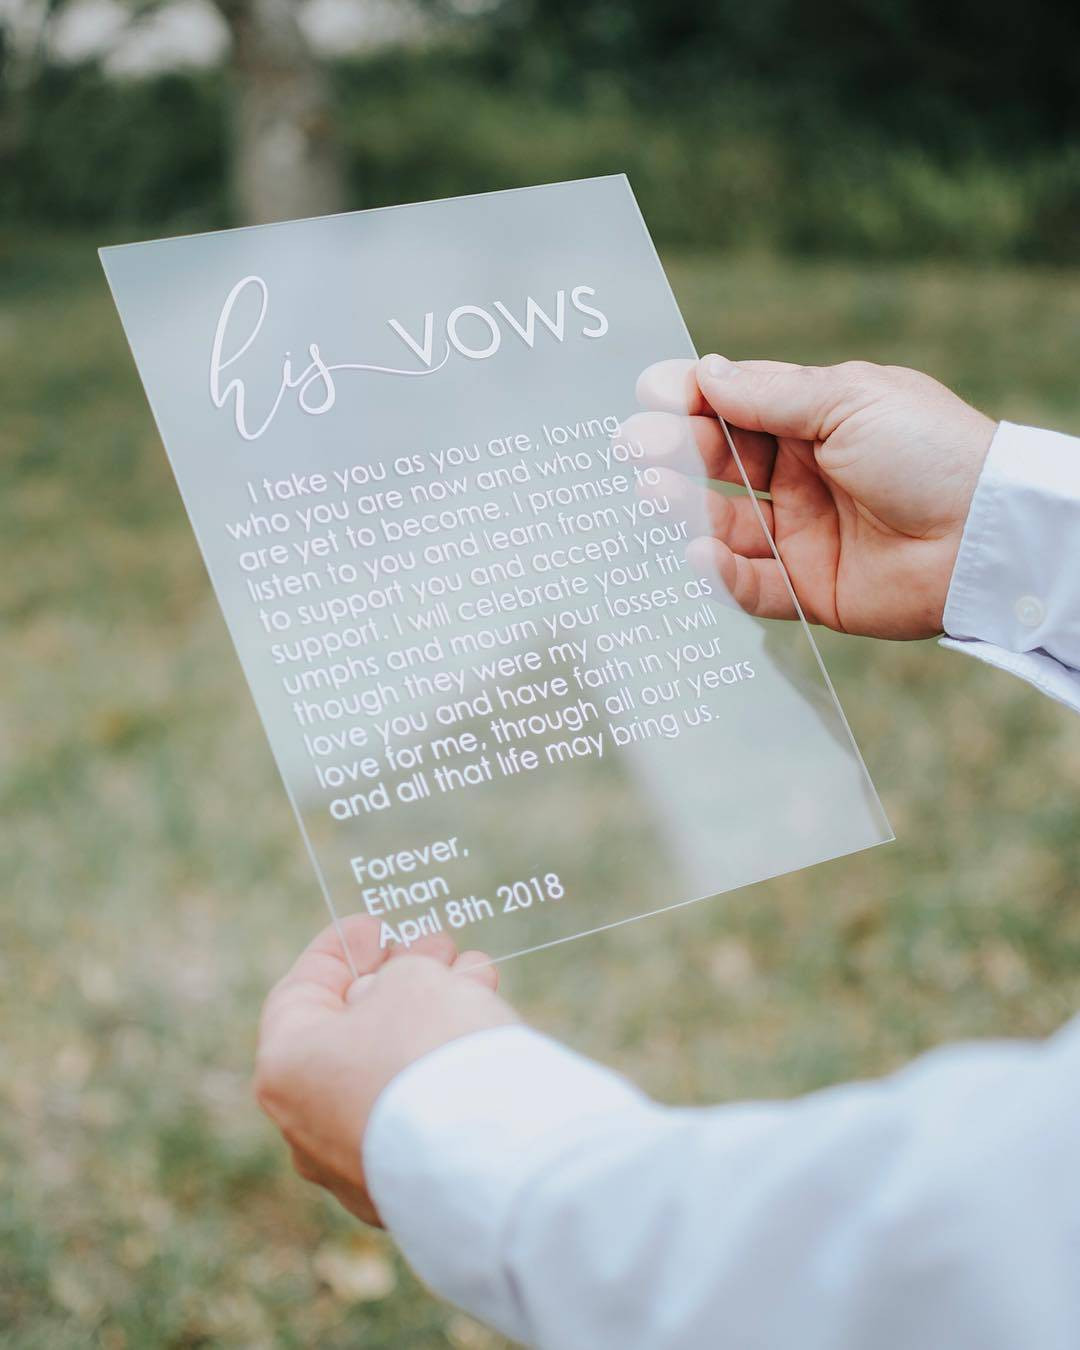 Different Wedding Vows
 How to pose Personal and Beautiful Unique Wedding Vows